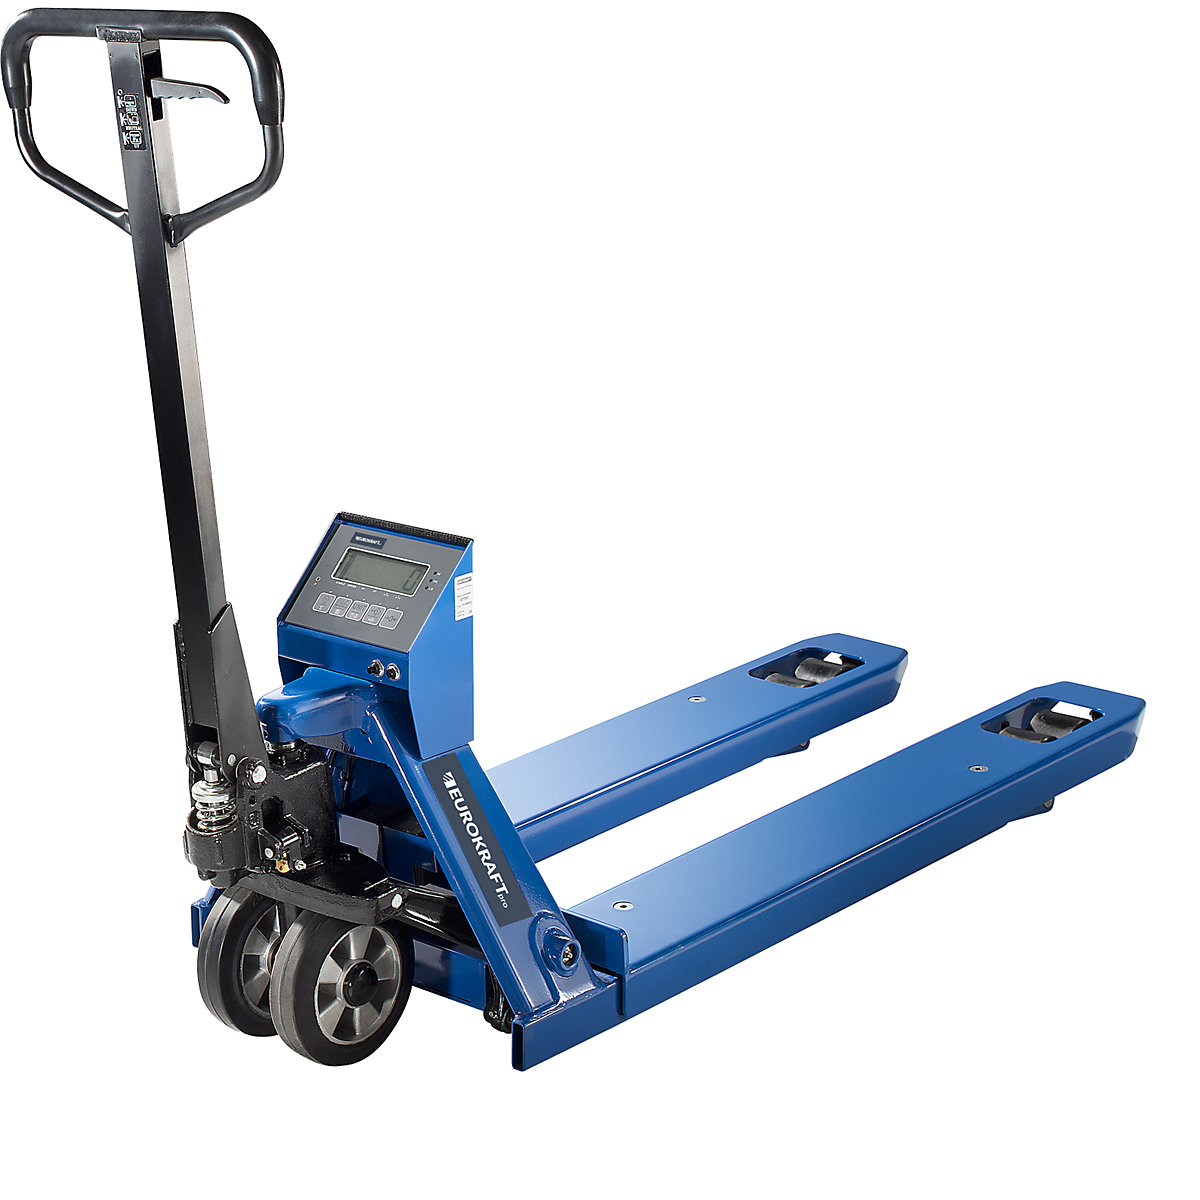 Pallet truck with weighing scale - eurokraft pro